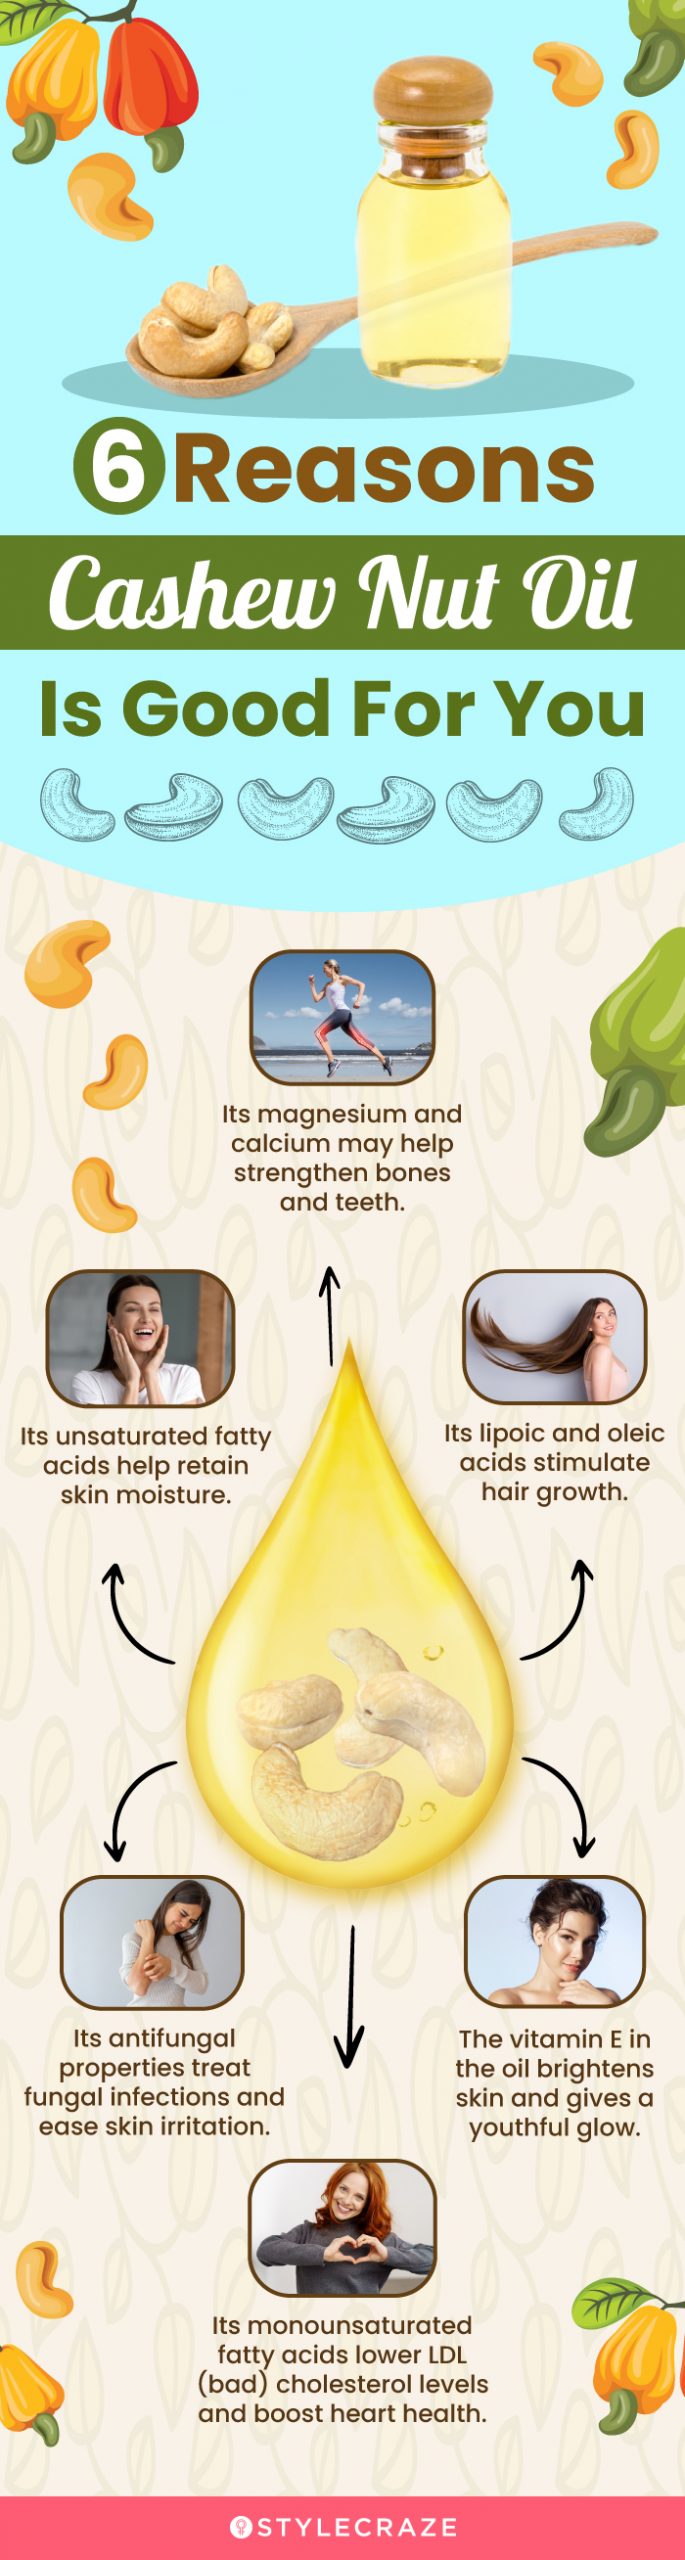 6 reasons cashew nut oil is good for you (infographic)